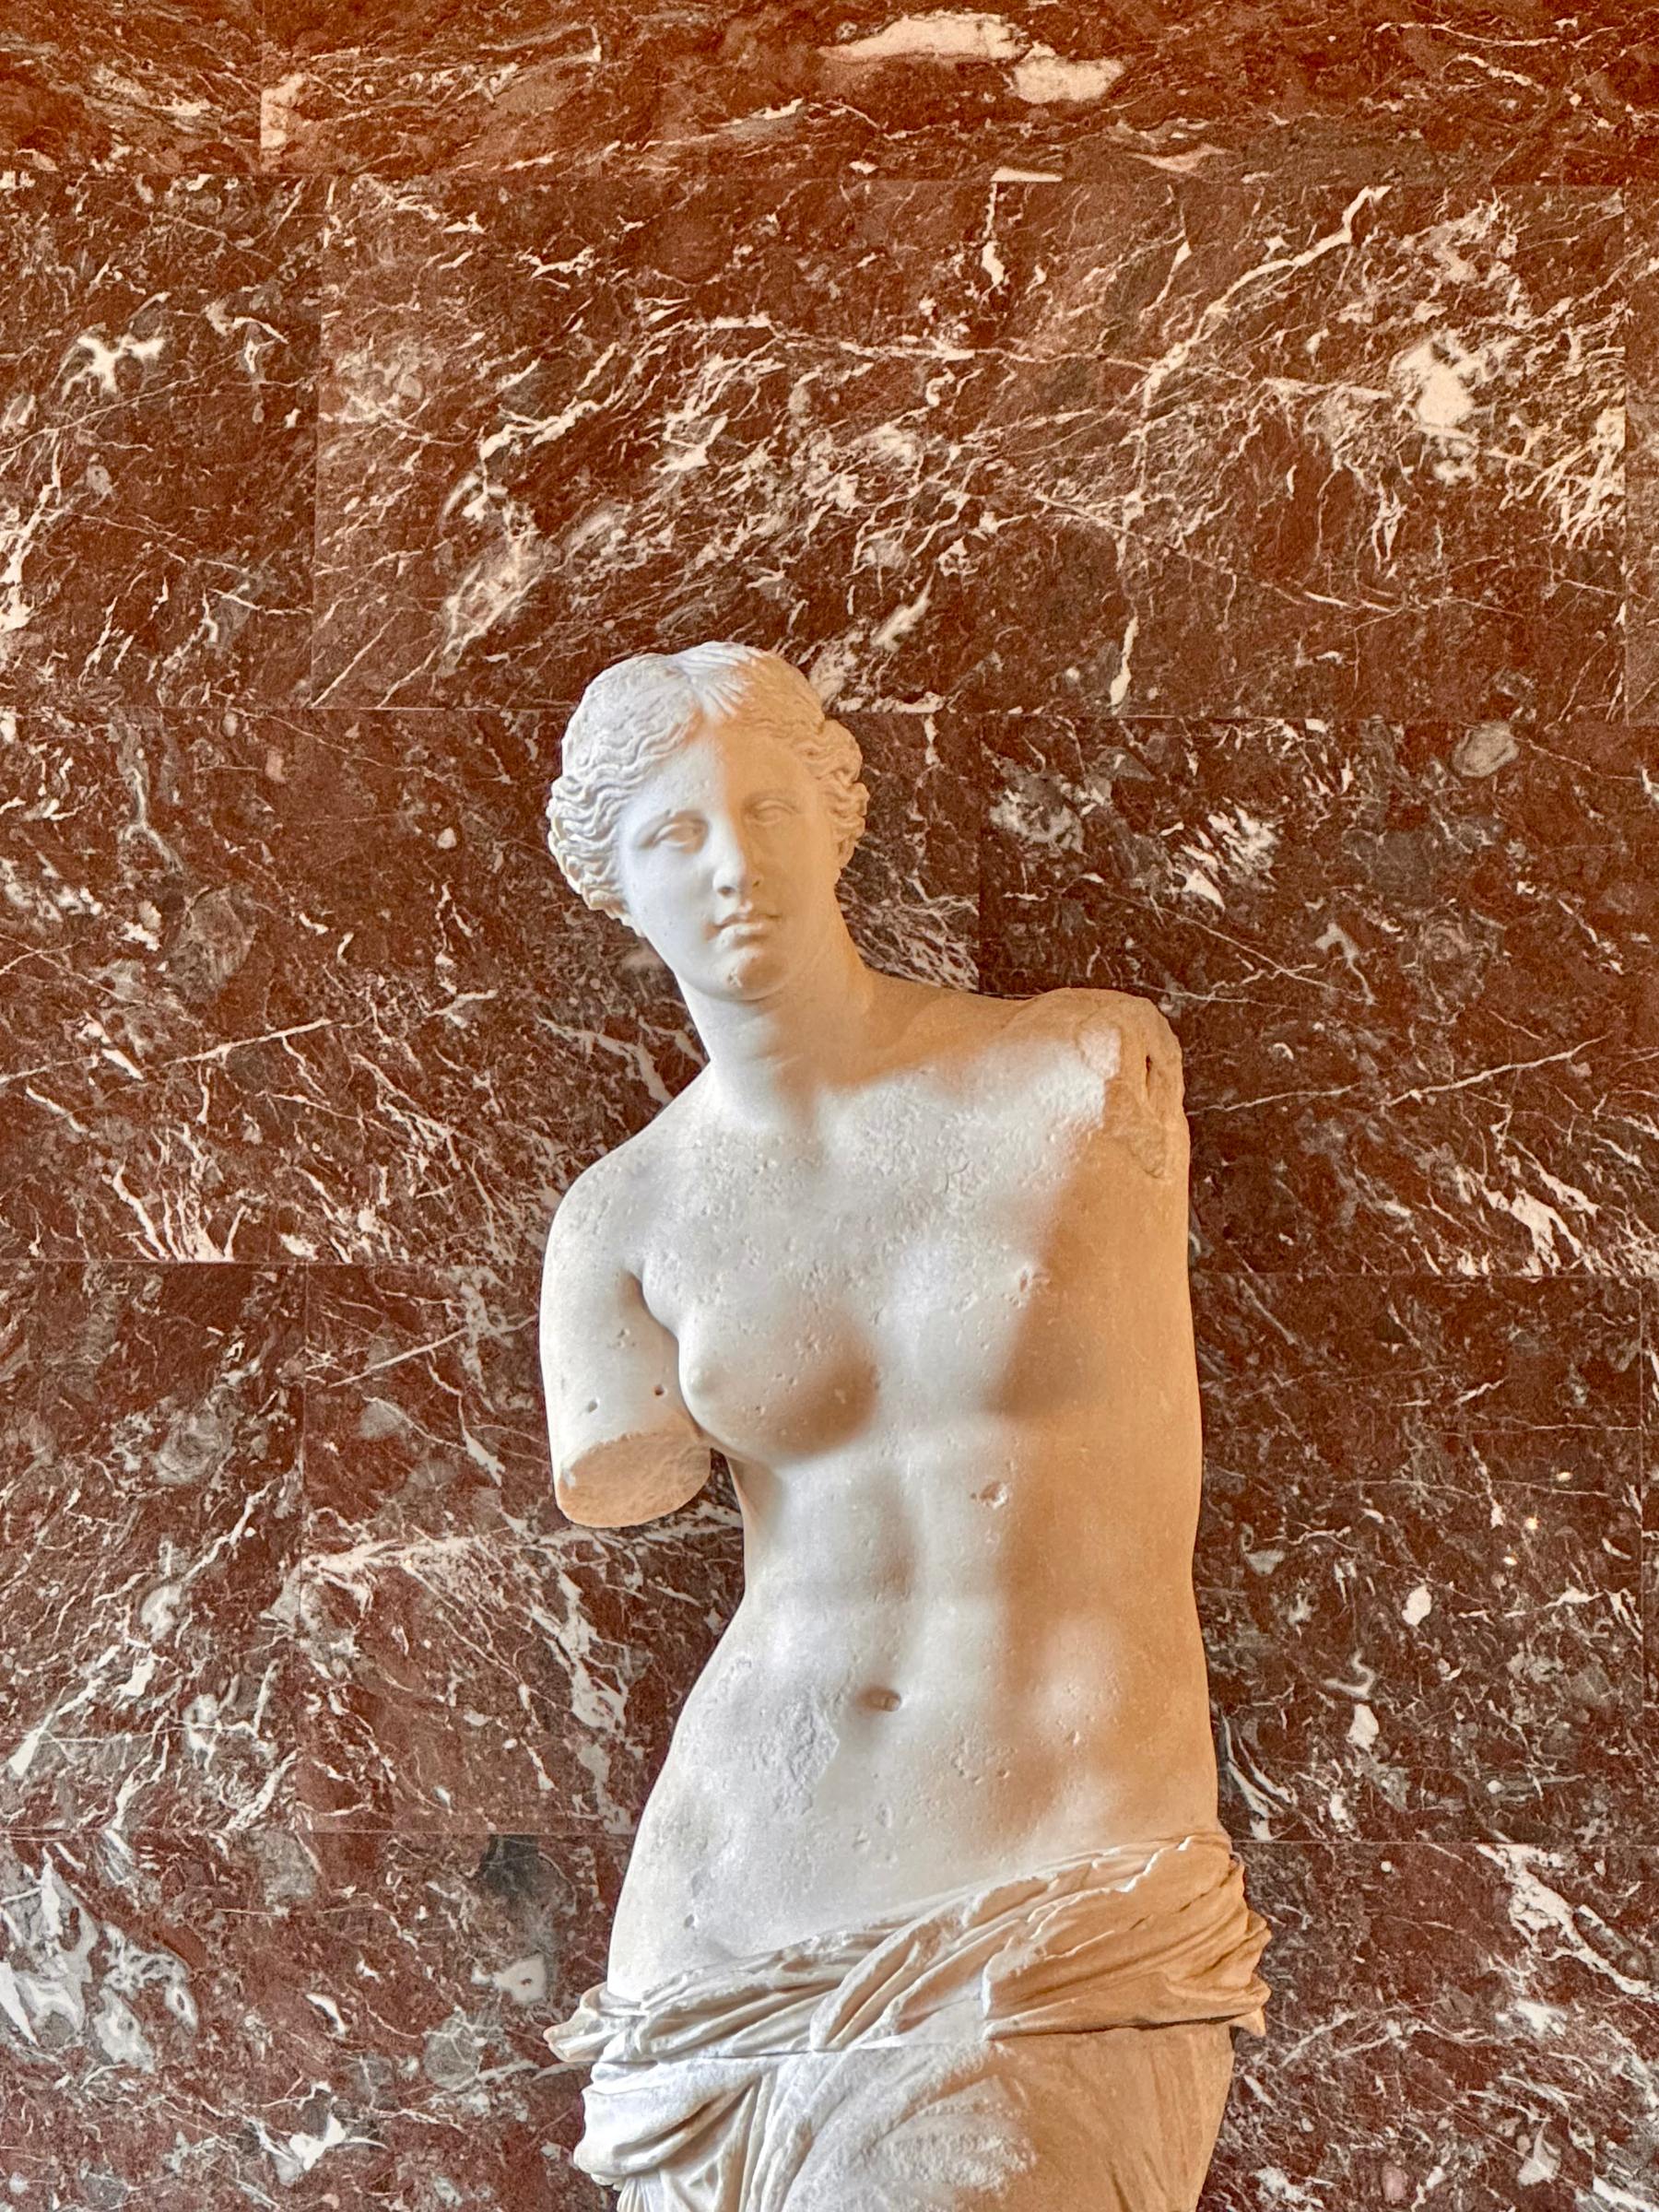 A marble statue of Venus, the Roman goddess of love and beauty, depicted as partially draped and set against a red marble background.